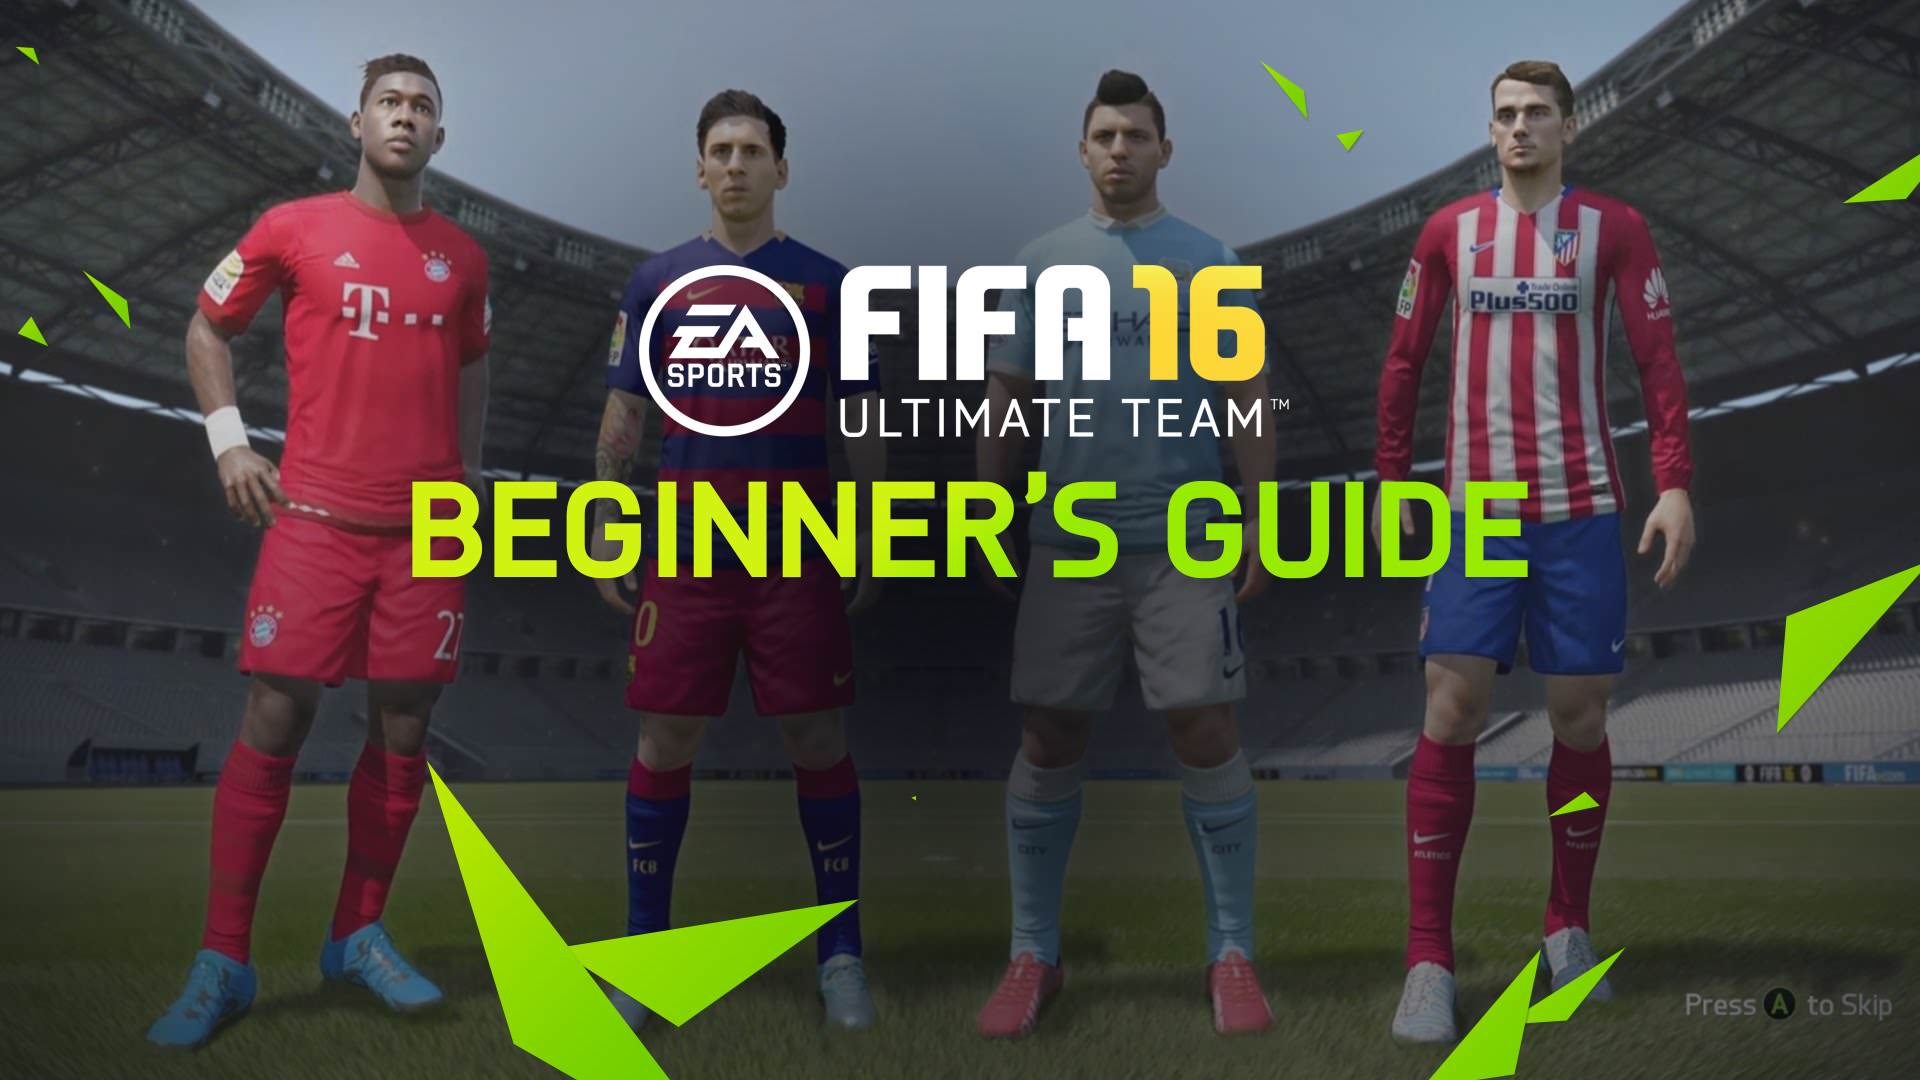 FIFA 16 Ultimate Team – A Beginner’s Guide